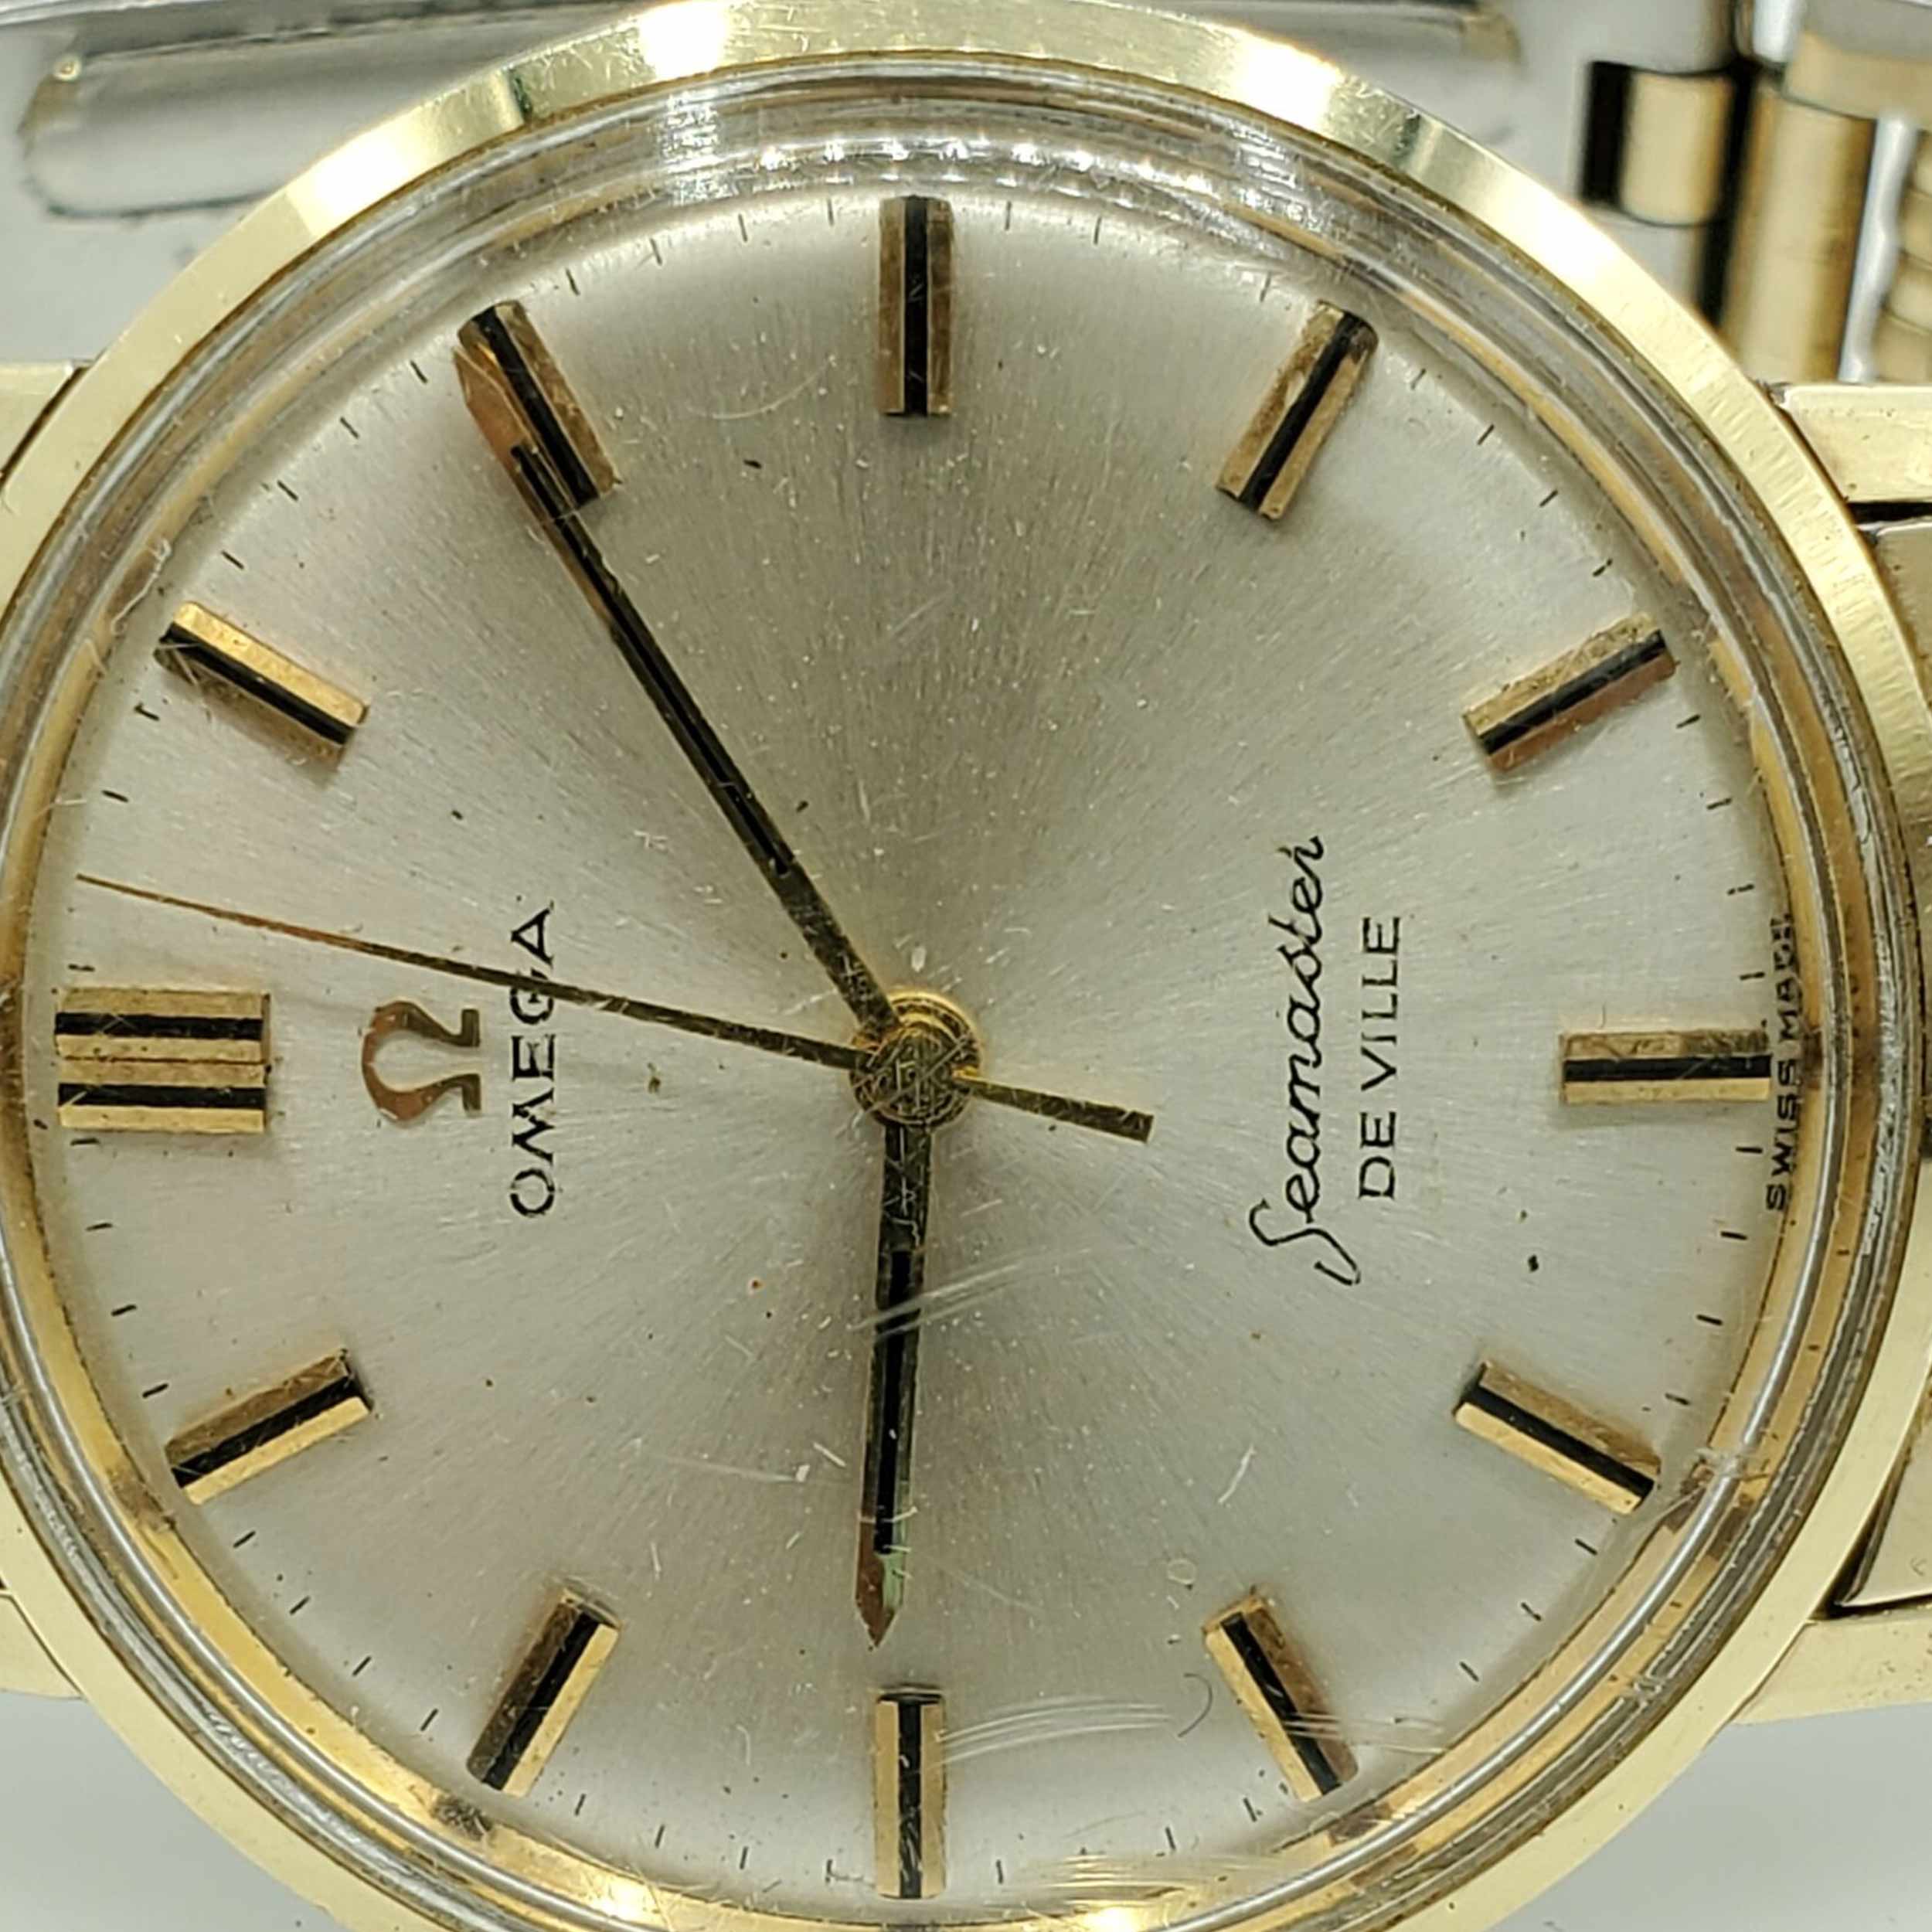 Last Days: Formex? COSC-certified Automatic Chronometer for $700